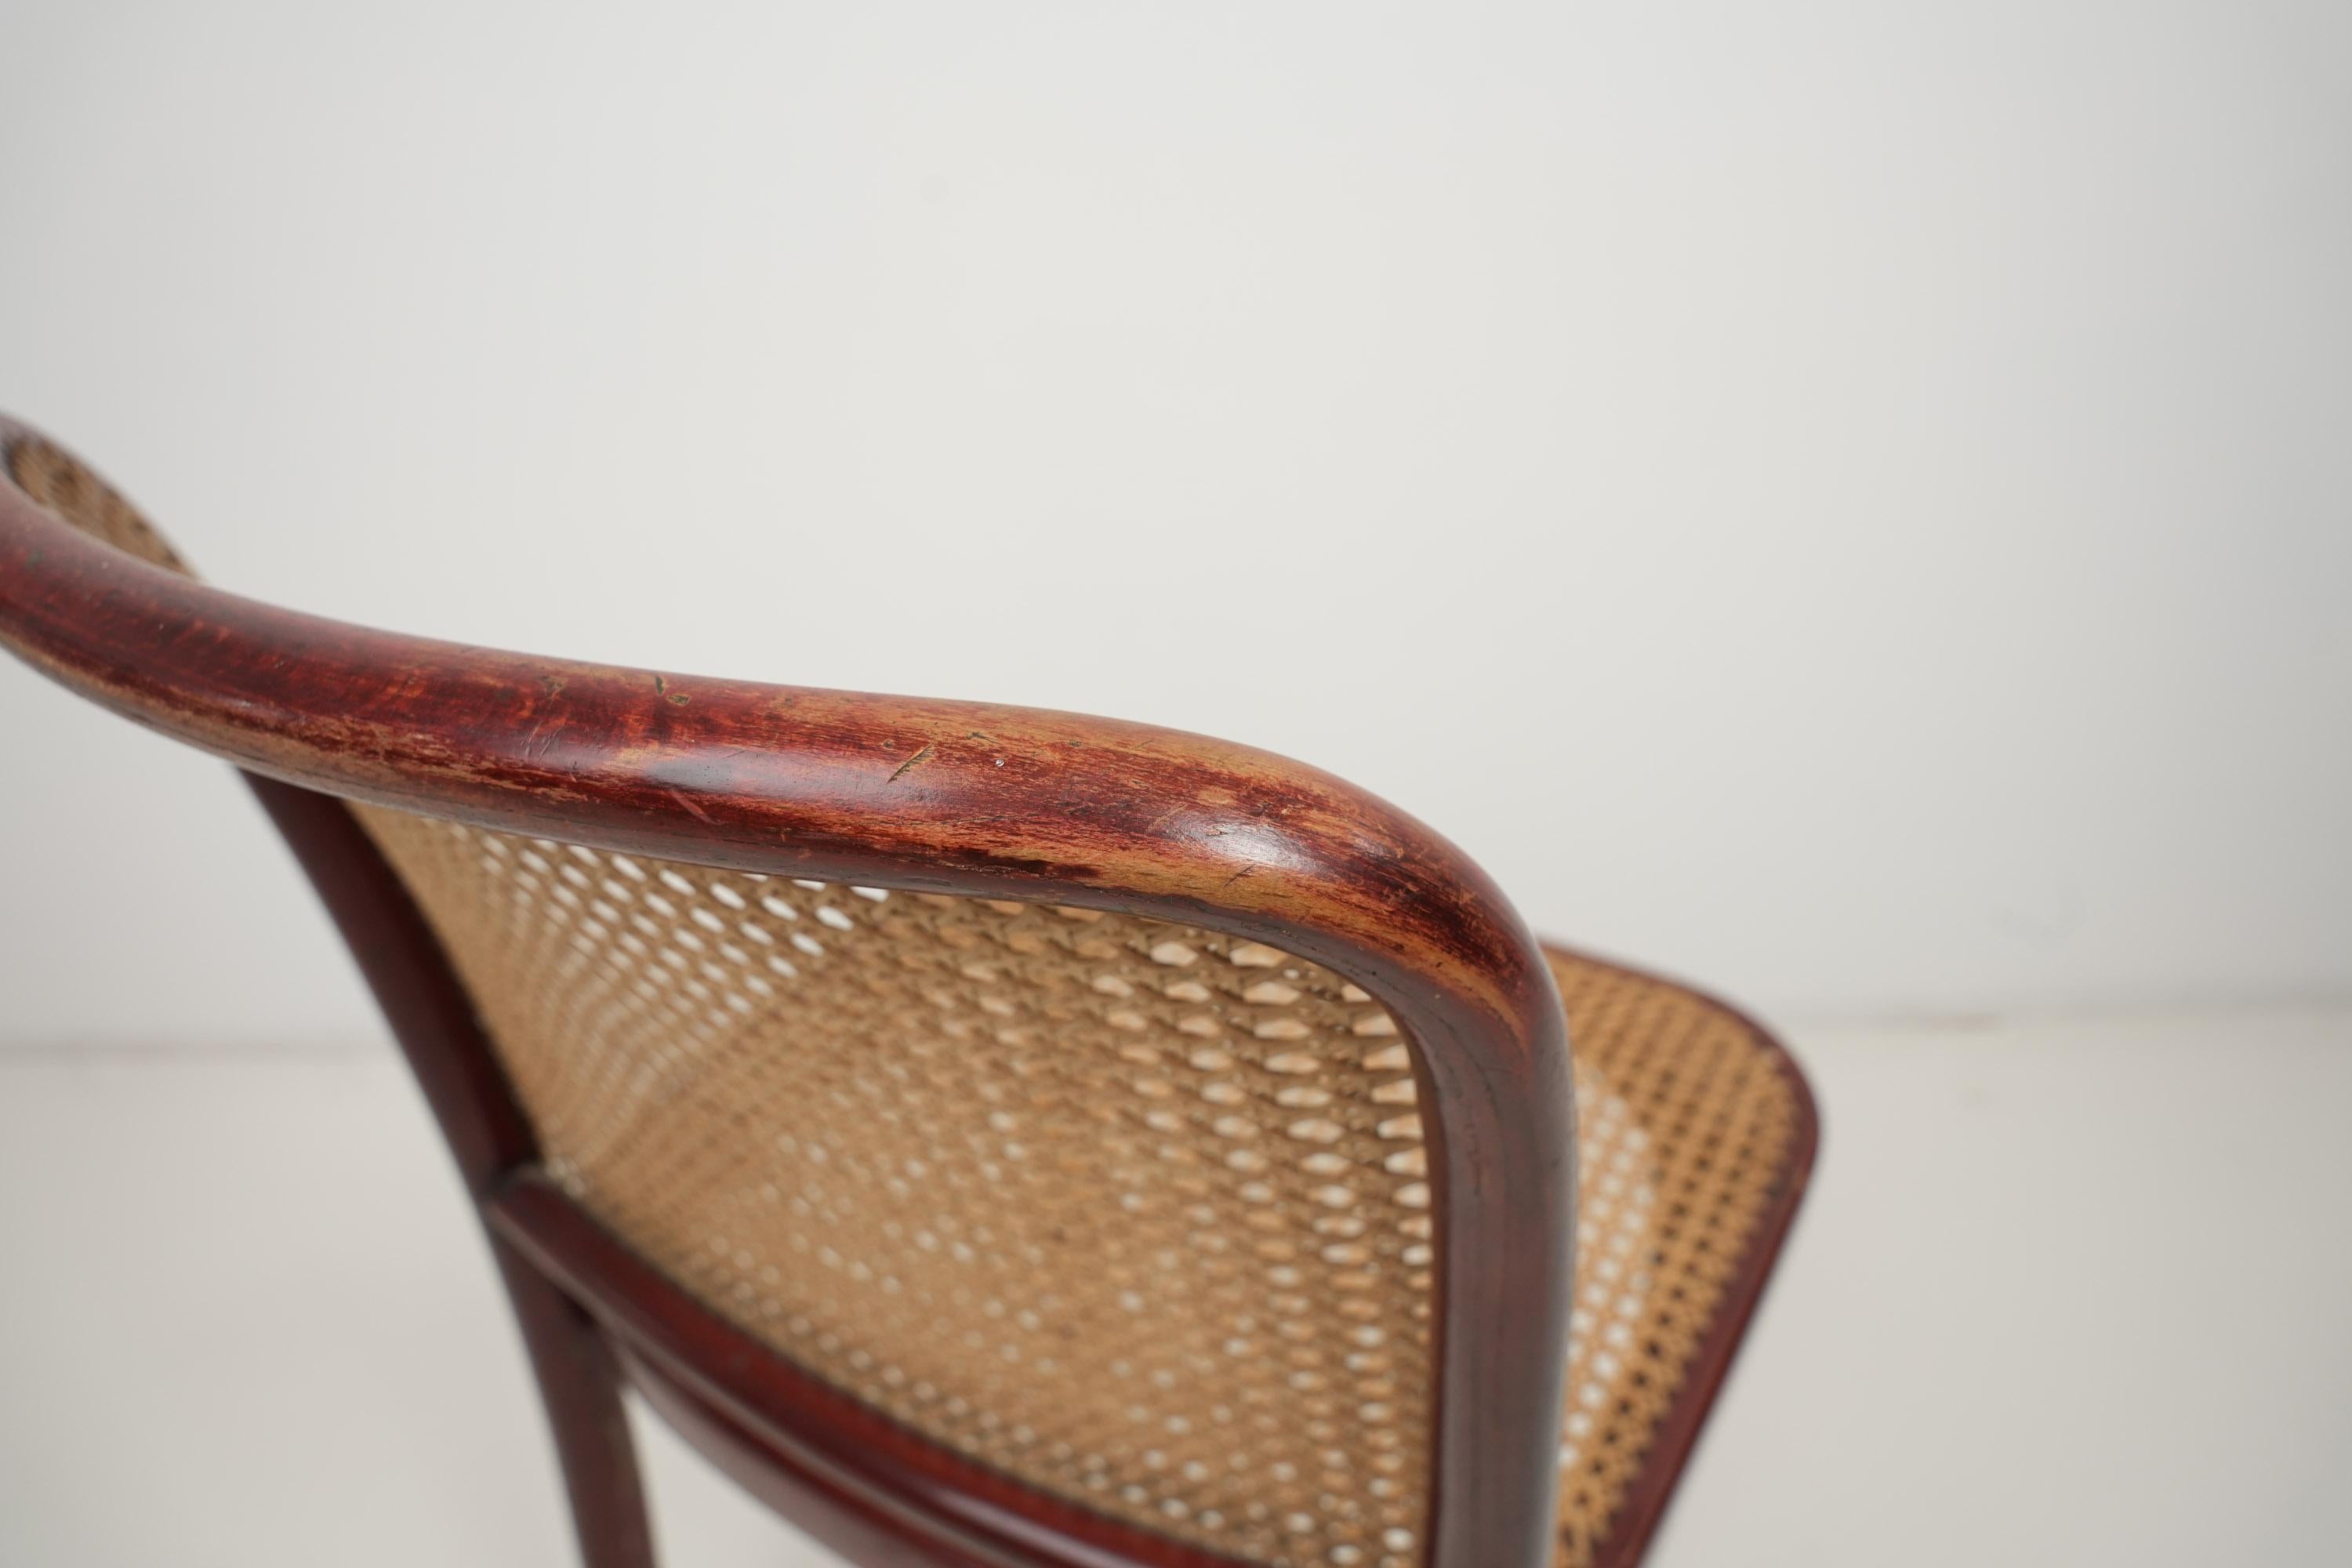 A 811 Chair By Josef Hoffmann or Josef Frank for Thonet 1920s For Sale 3